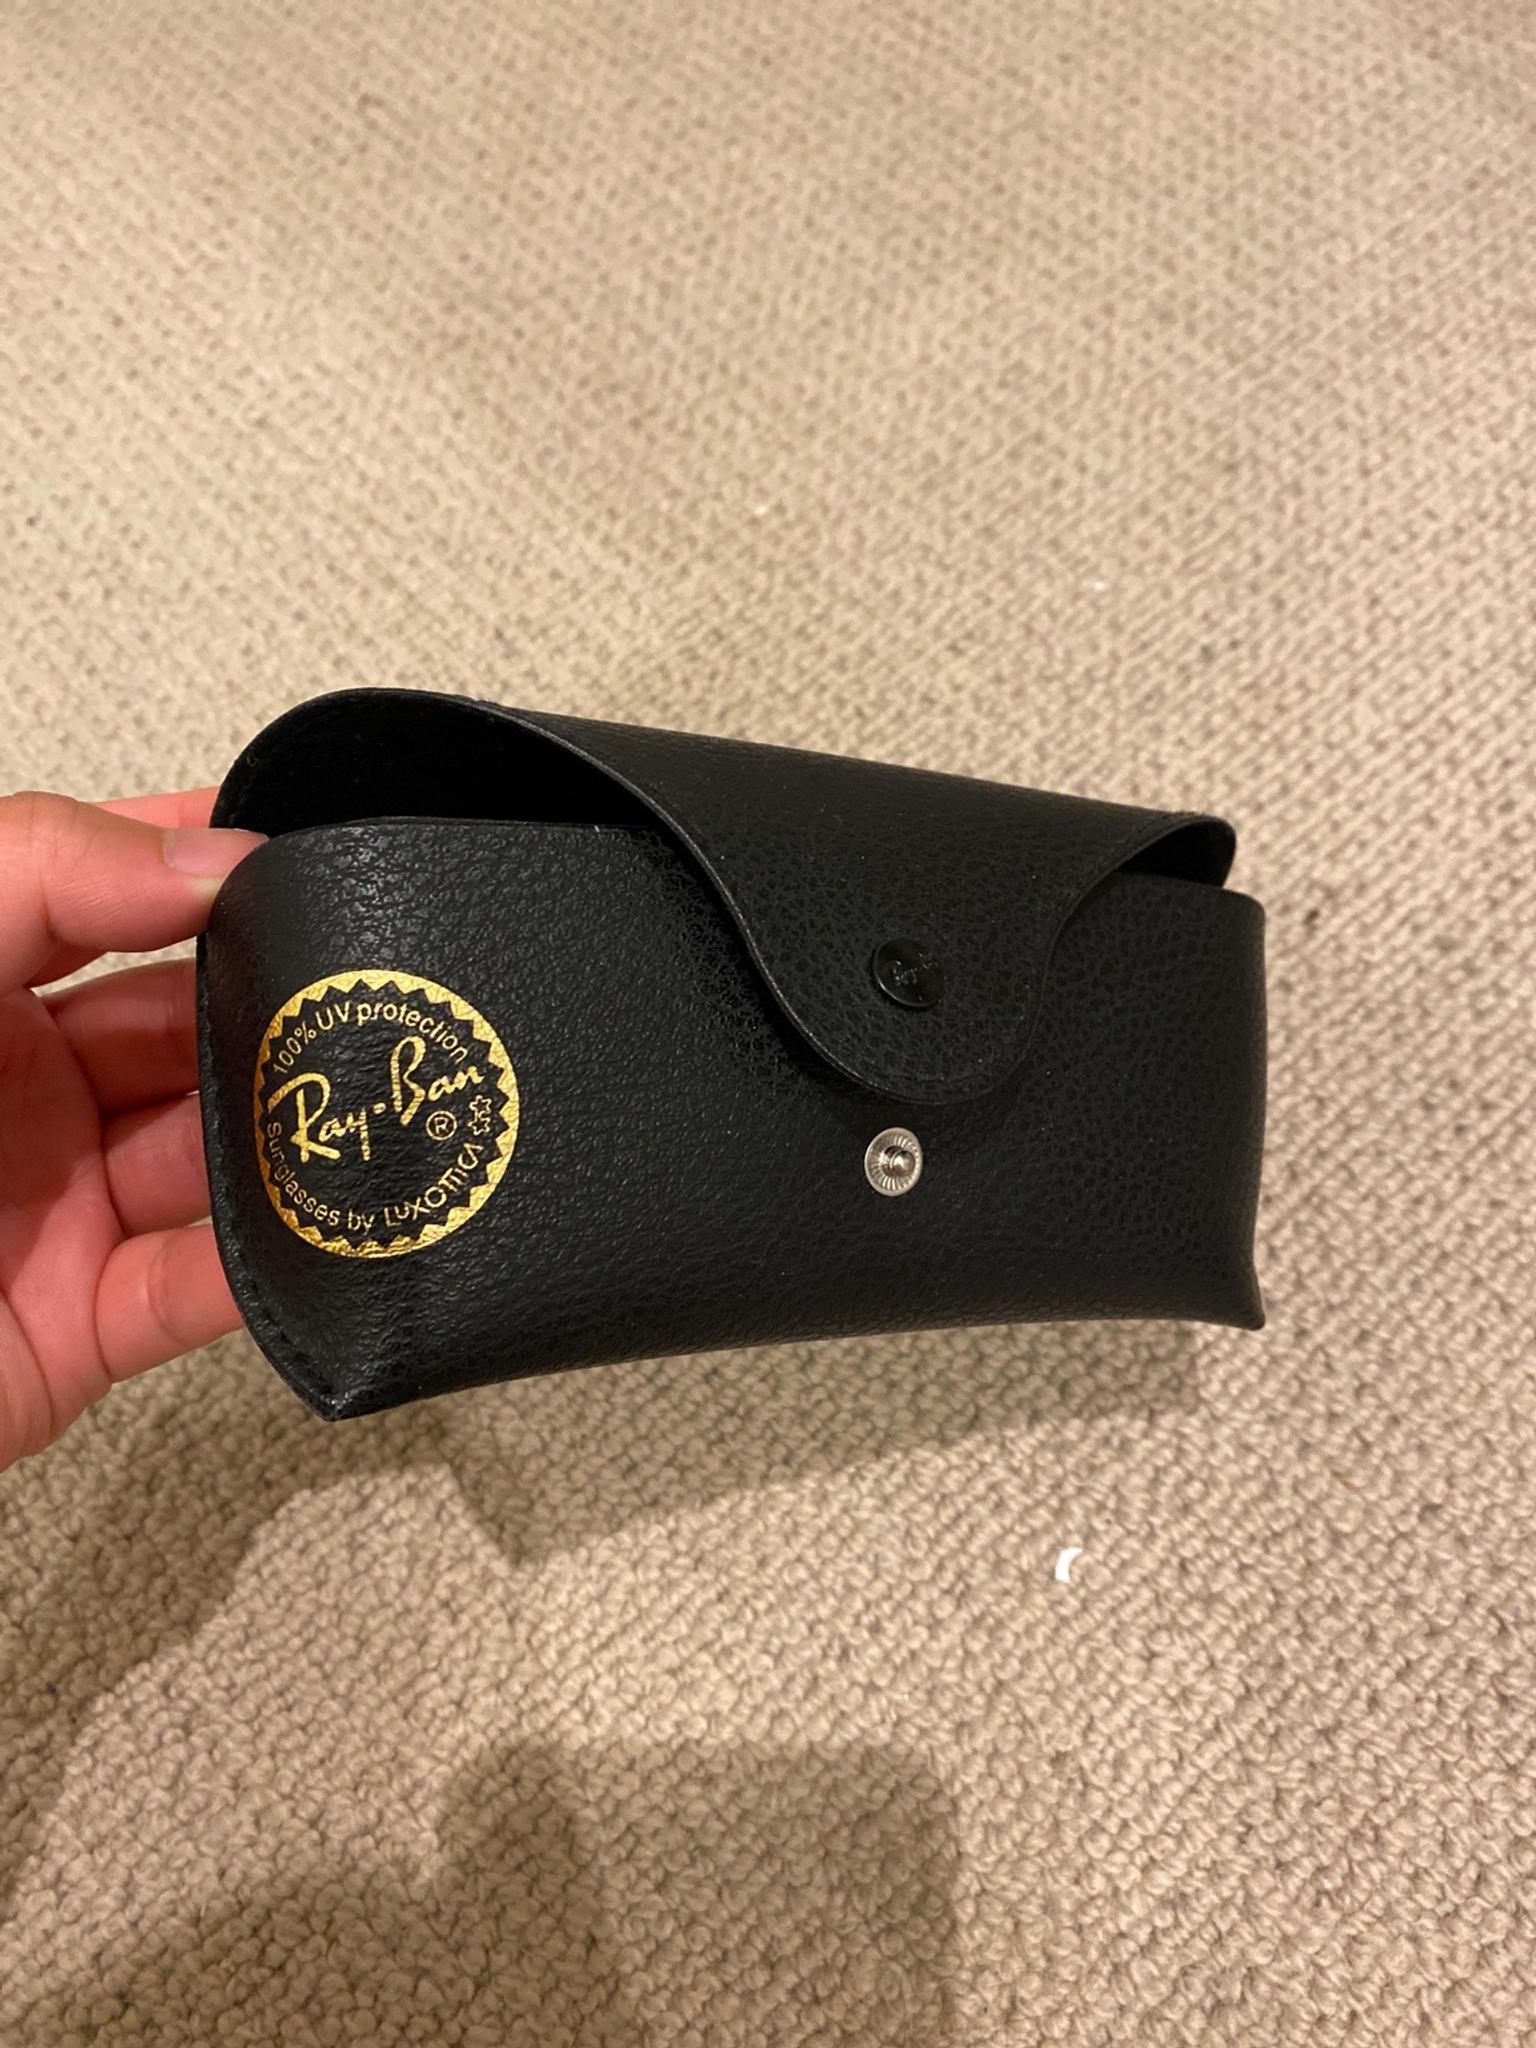 ray ban sunglass case only